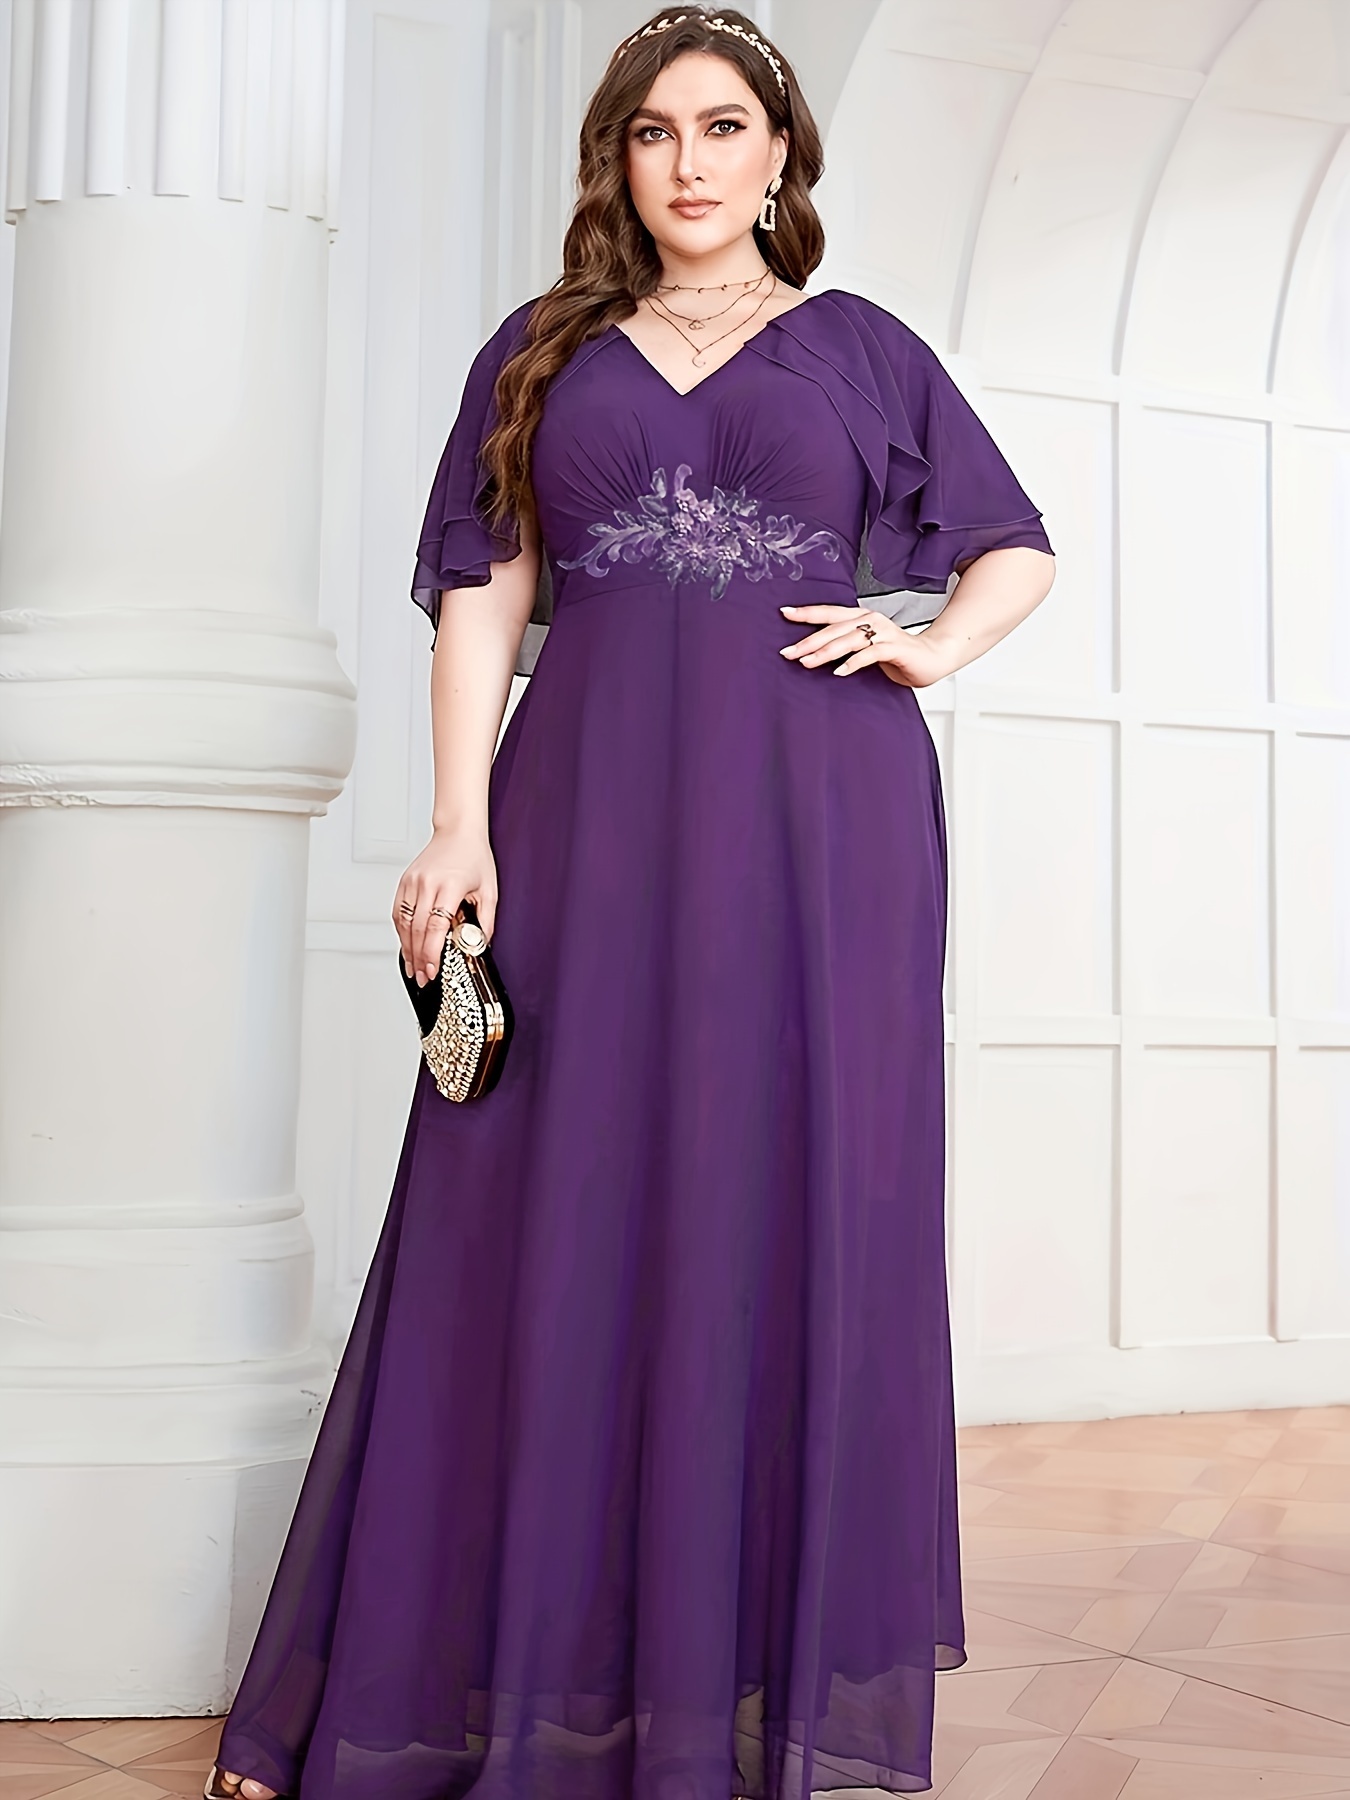 Elegant Plus Size Purple Lace Mother of the Bride Dress - Sheer Neck, Long  Sleeves, Aso Ebi Style, Floor-Length Evening Gown